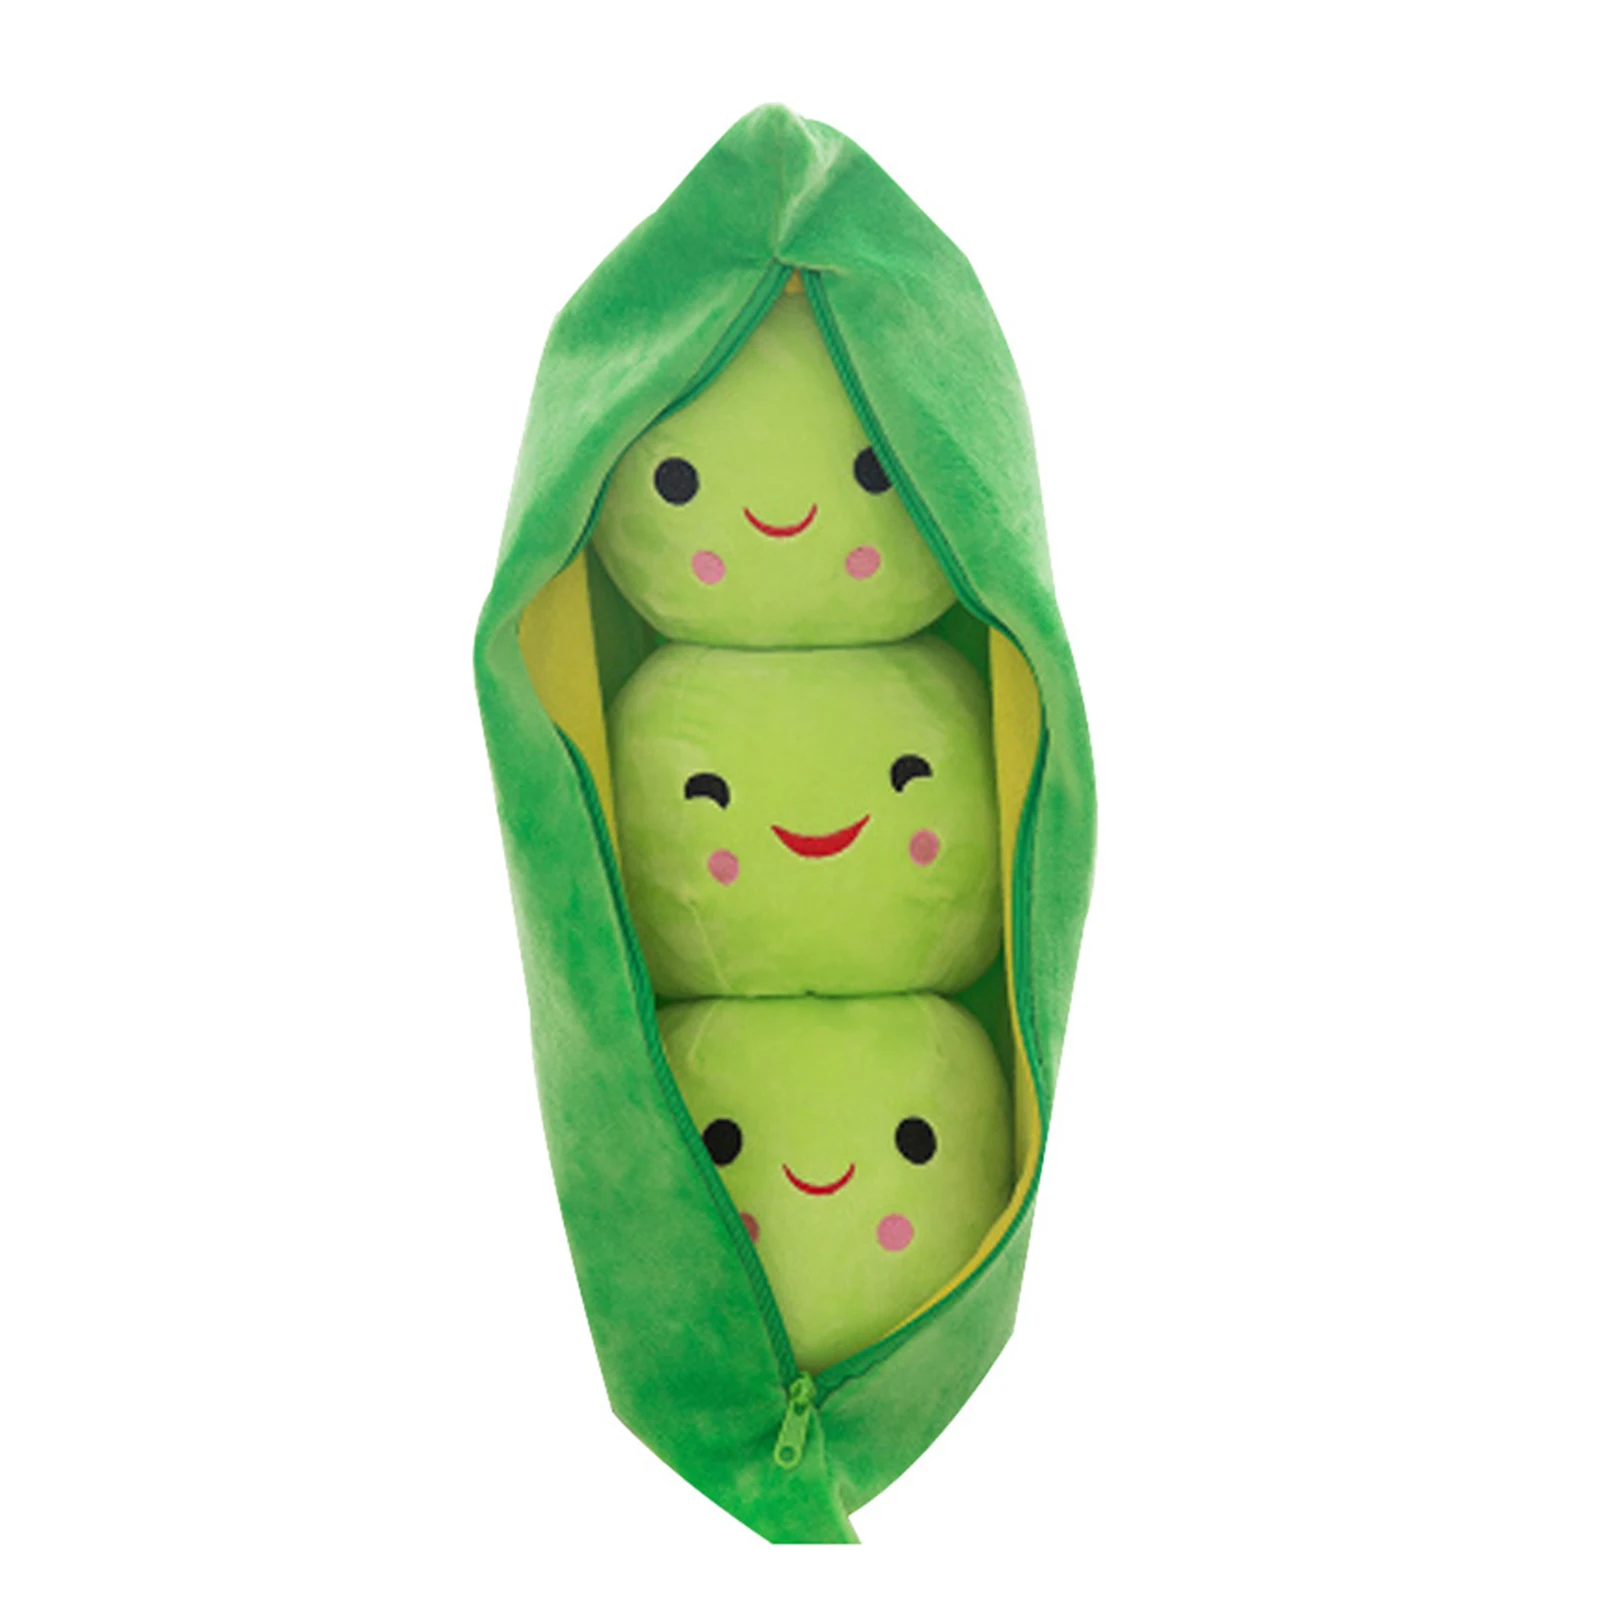 Lovely Pea Pod Shape Plush Bean Bag With 3 Smiling Beans Soft Pillow Home Decoration